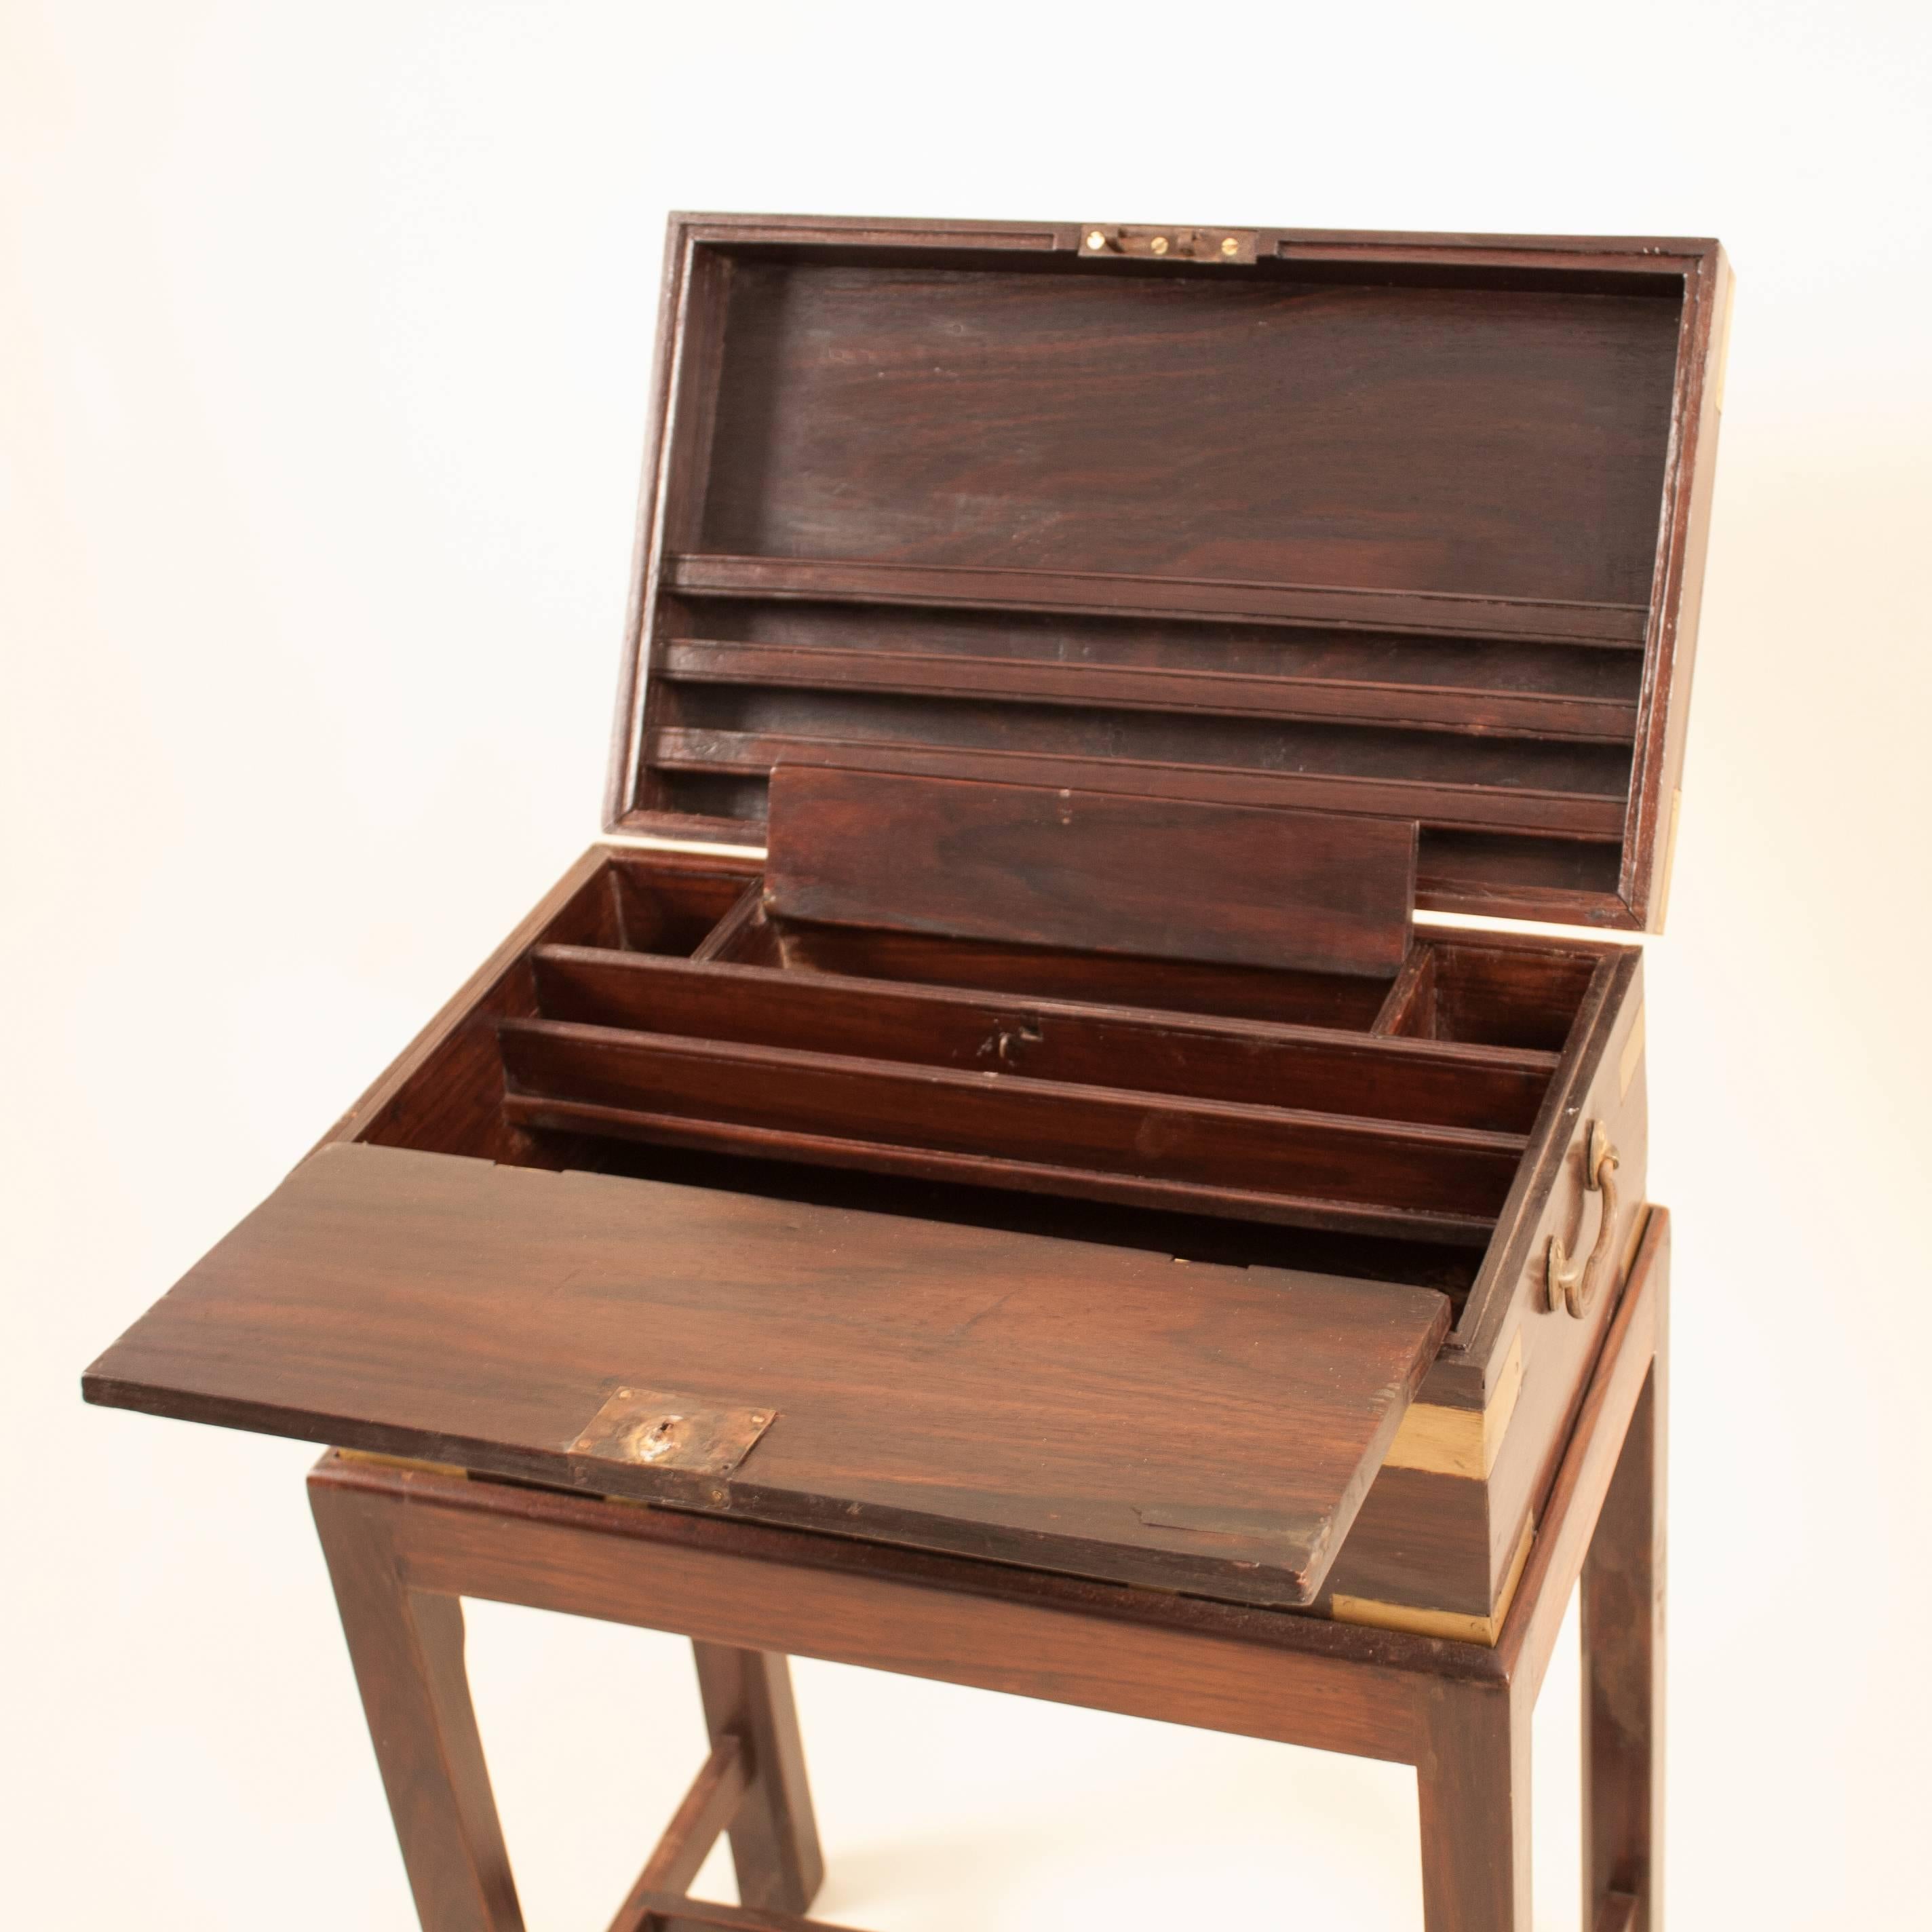 British Colonial British Campaign Rosewood Officer's Chest on Stand